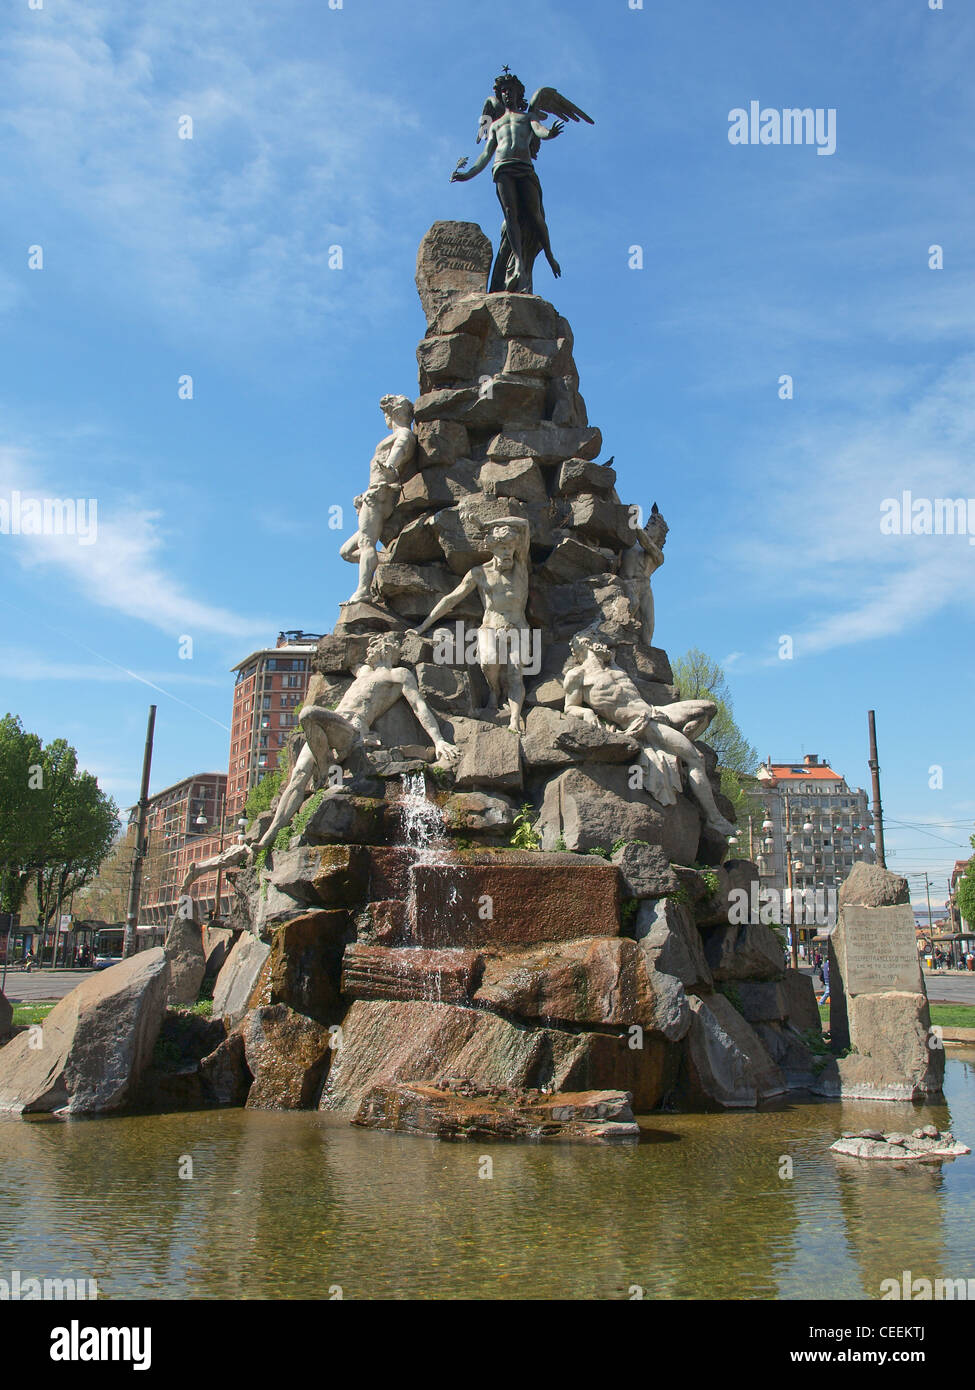 Frejus Tunnel Monument in Piazza Statuto, Turin, Italy Stock Photo